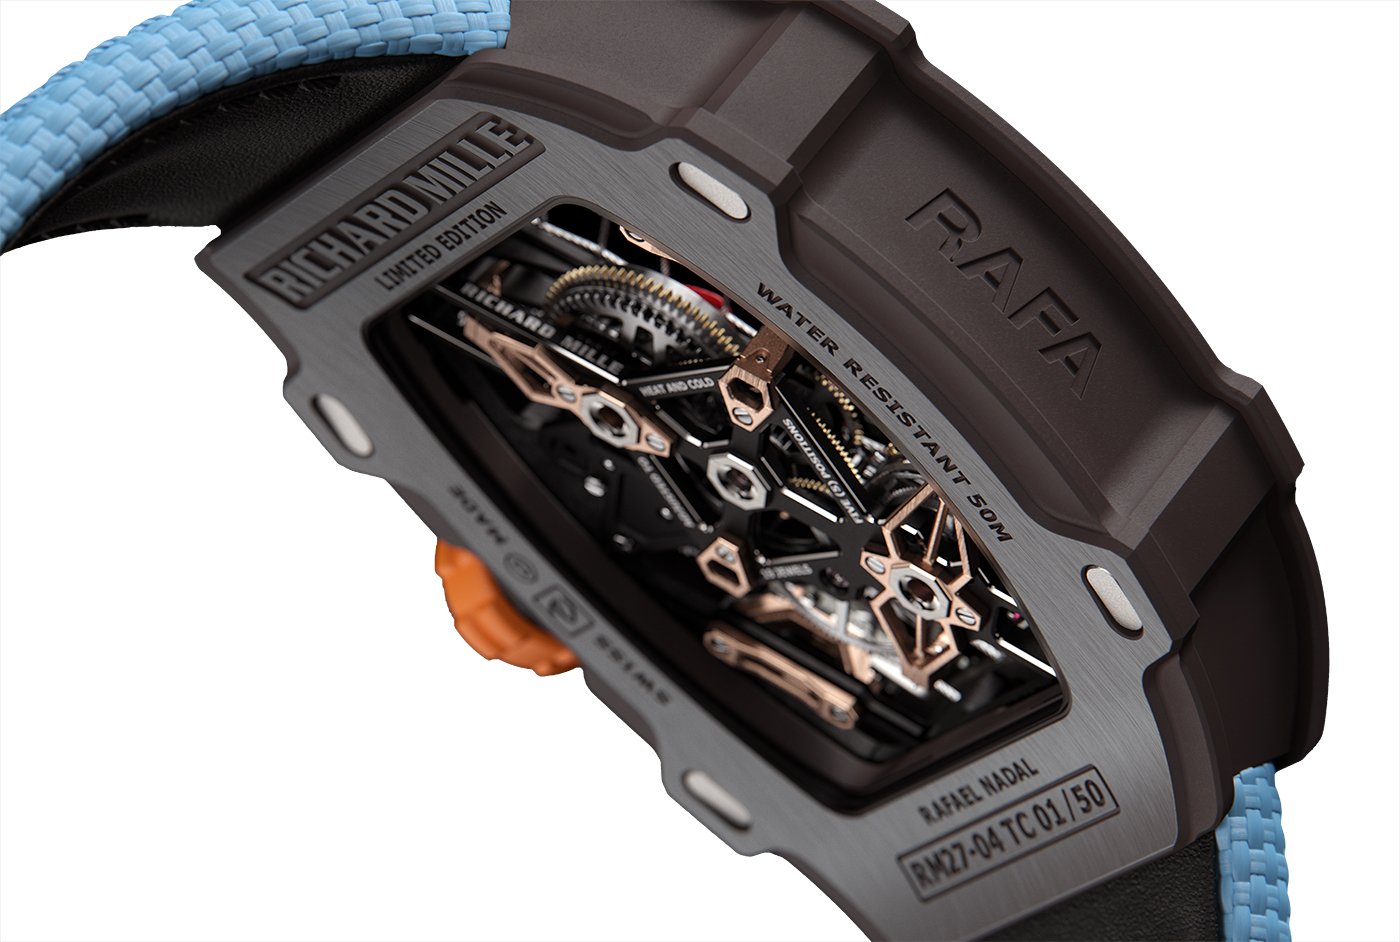 Rafael Nadal Just Won His 14th French Open Title Wearing A Richard Mille Worth $3.5 Million